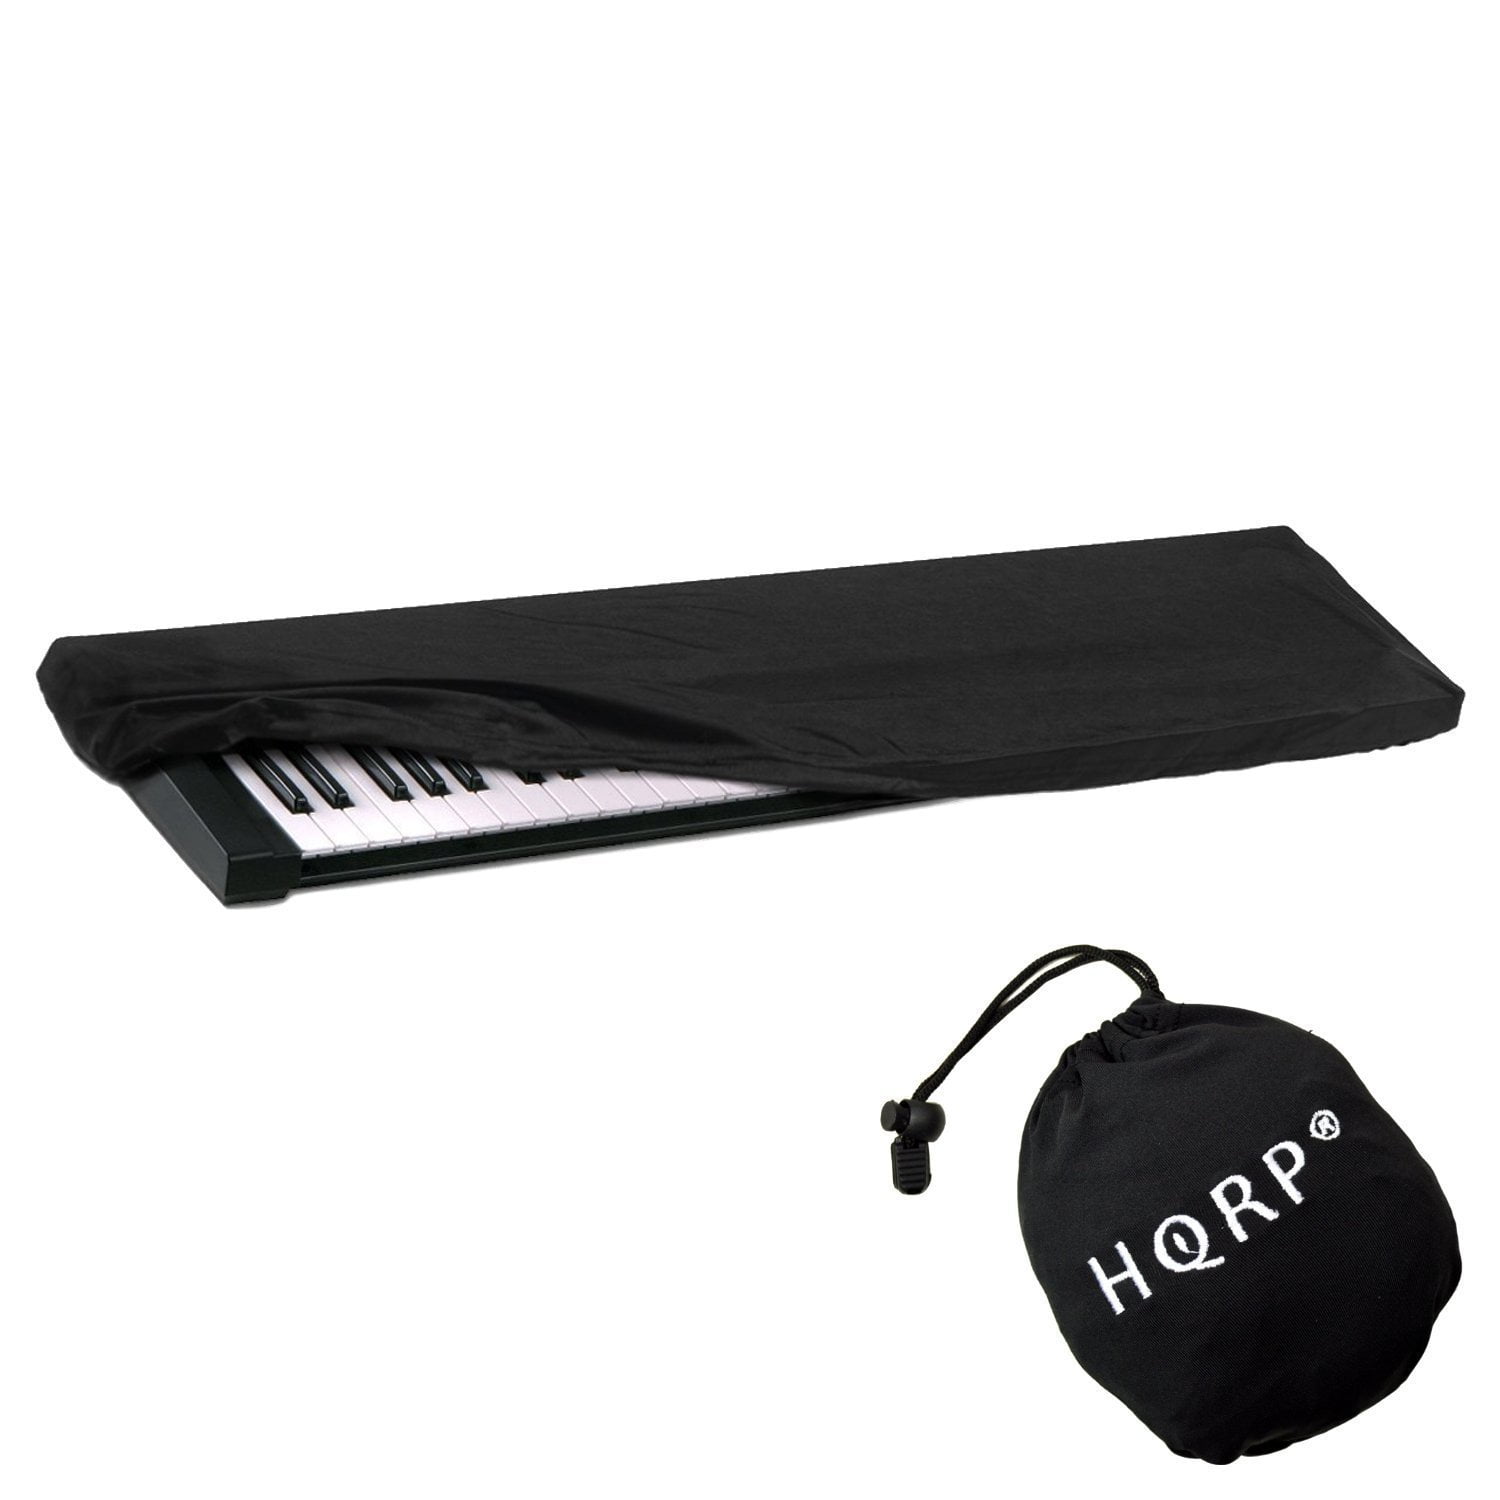 HQRP Elastic Keyboard Dust Cover for Casio CDP-130BK/SR CDP-130BK CDP-130 CDP-220 CDP-100 CDP-120 Piano Synthesizer - Walmart.com